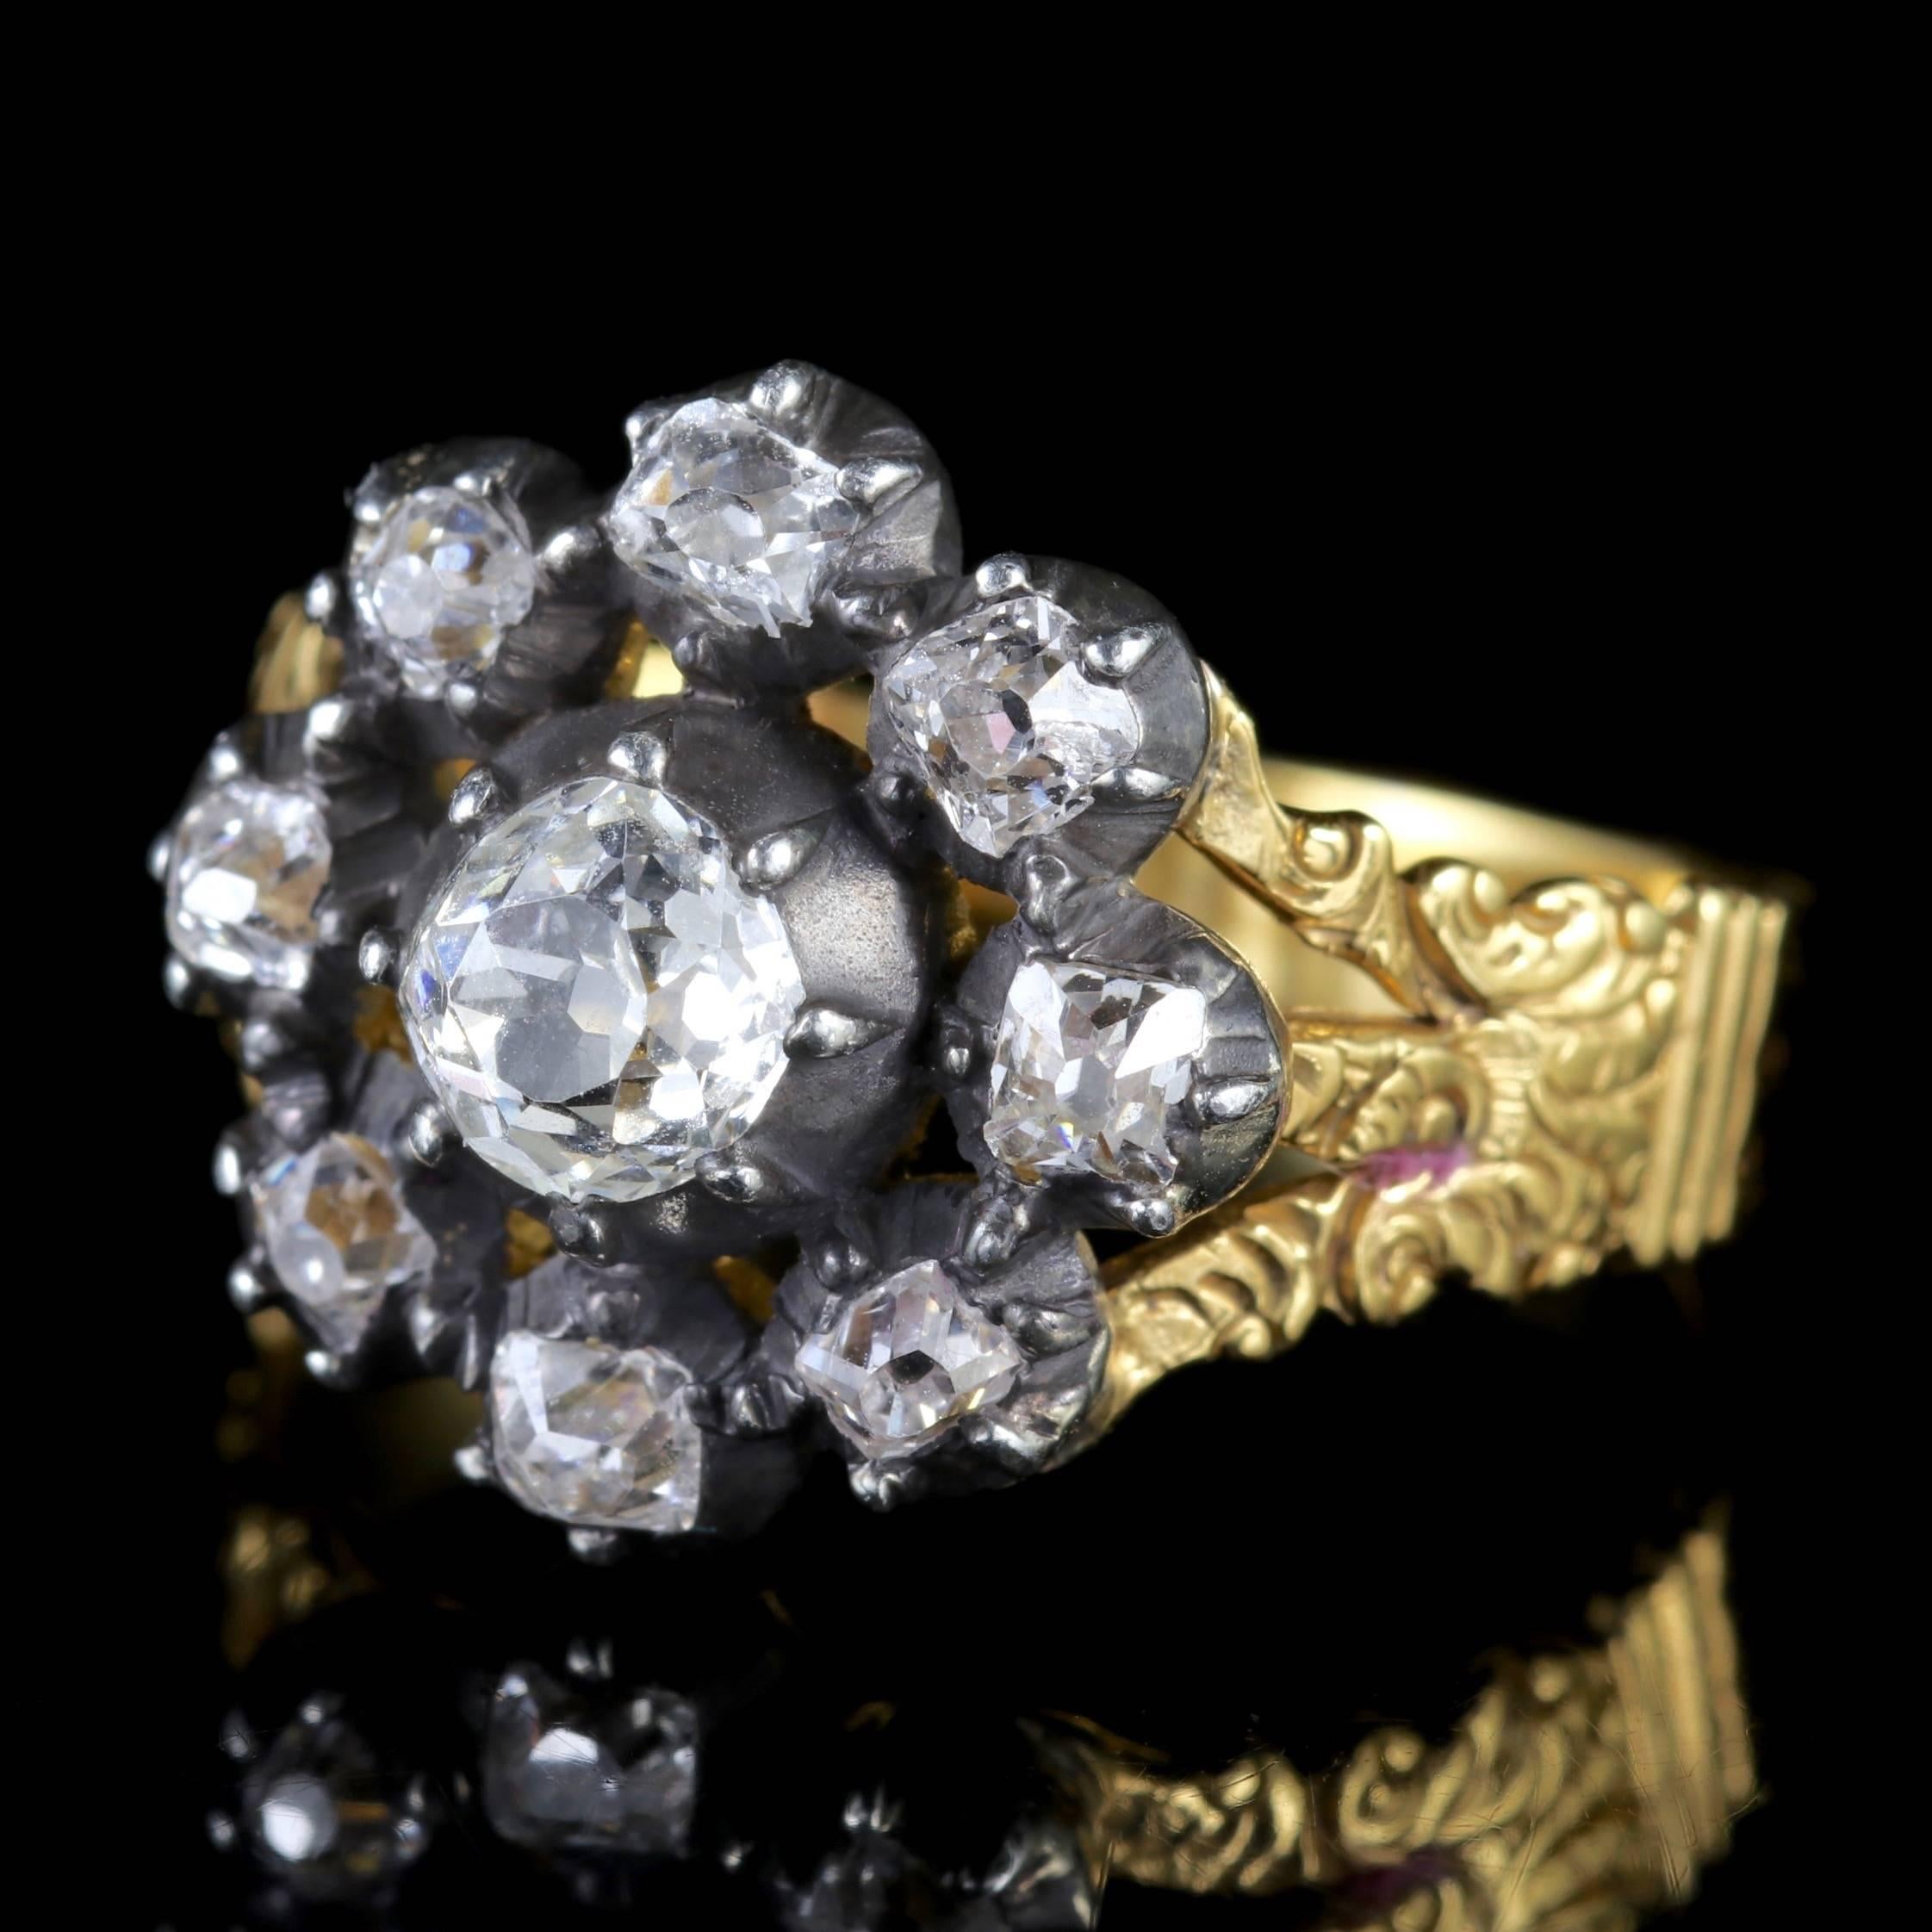 To read more please click continue reading below-

This fabulous all original antique 18ct Gold and Silver Georgian cluster ring is Circa 1780.

Due to its age, Georgian jewellery is quite rare, with some pieces almost three hundred years old. From